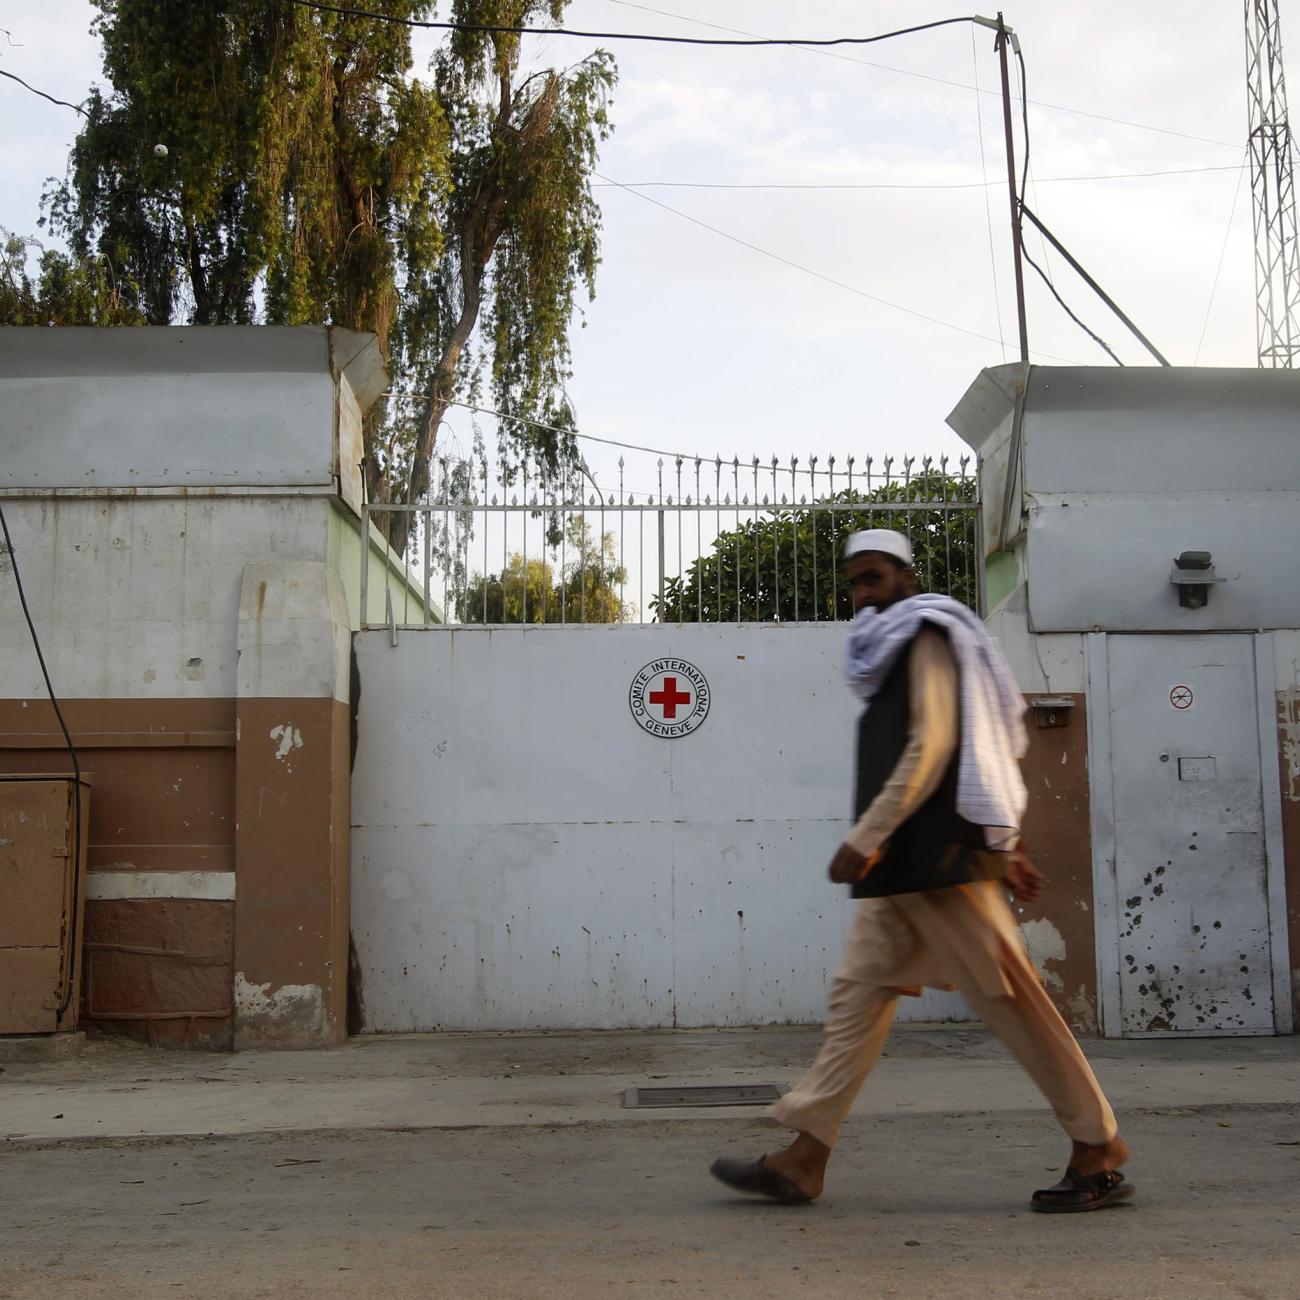 A man walks past the front gate of the International Committee of the Red Cross (ICRC) office in Jalalabad province